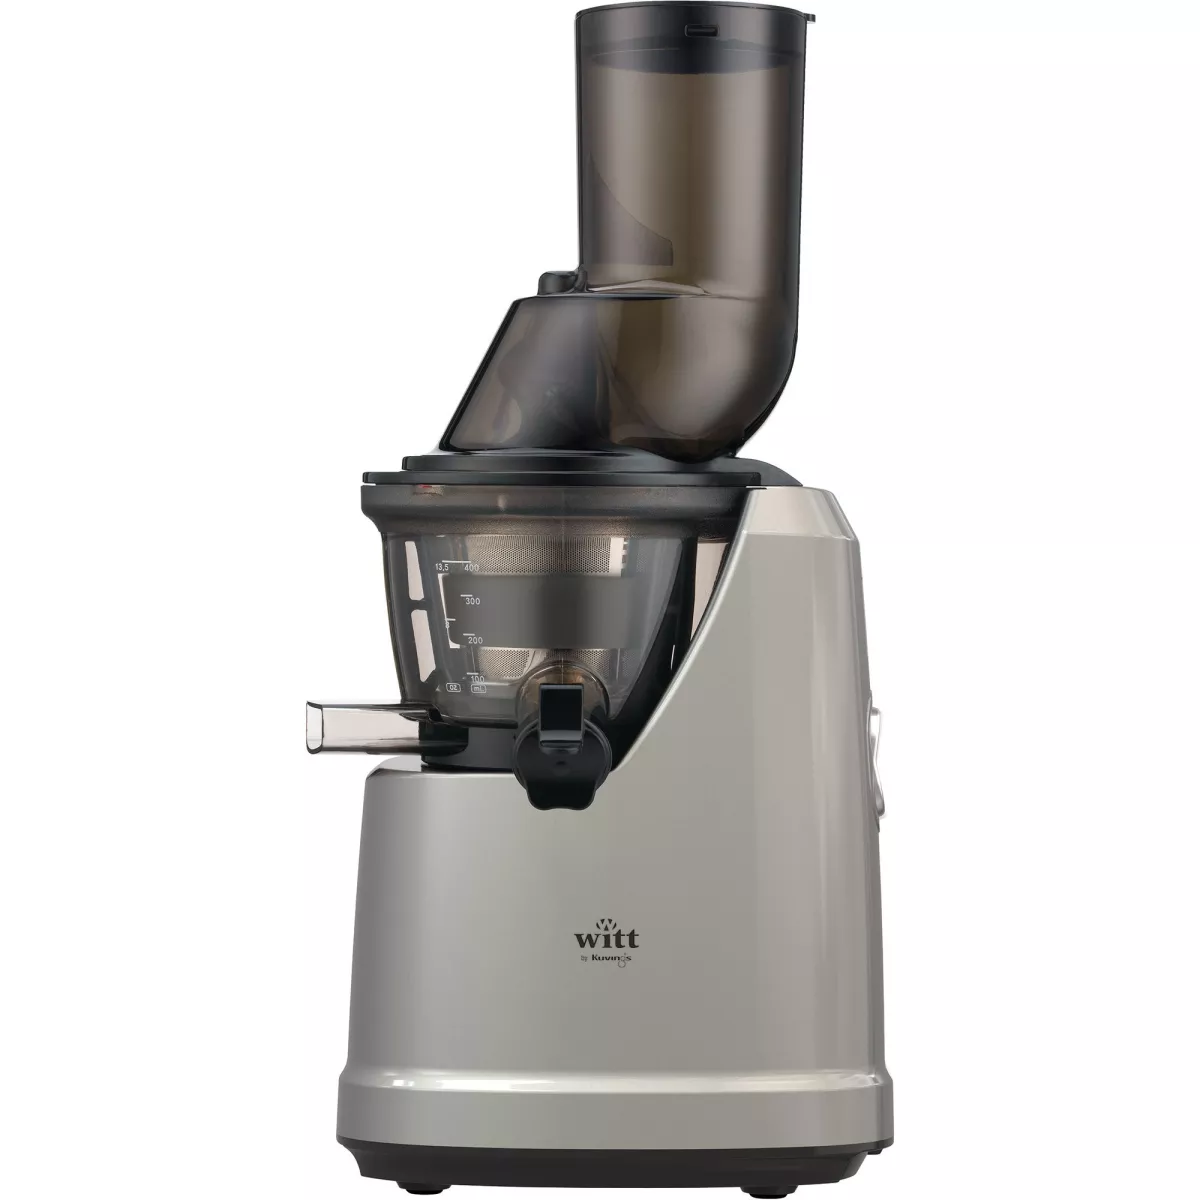 #1 - Witt by Kuvings B6200S slow juicer